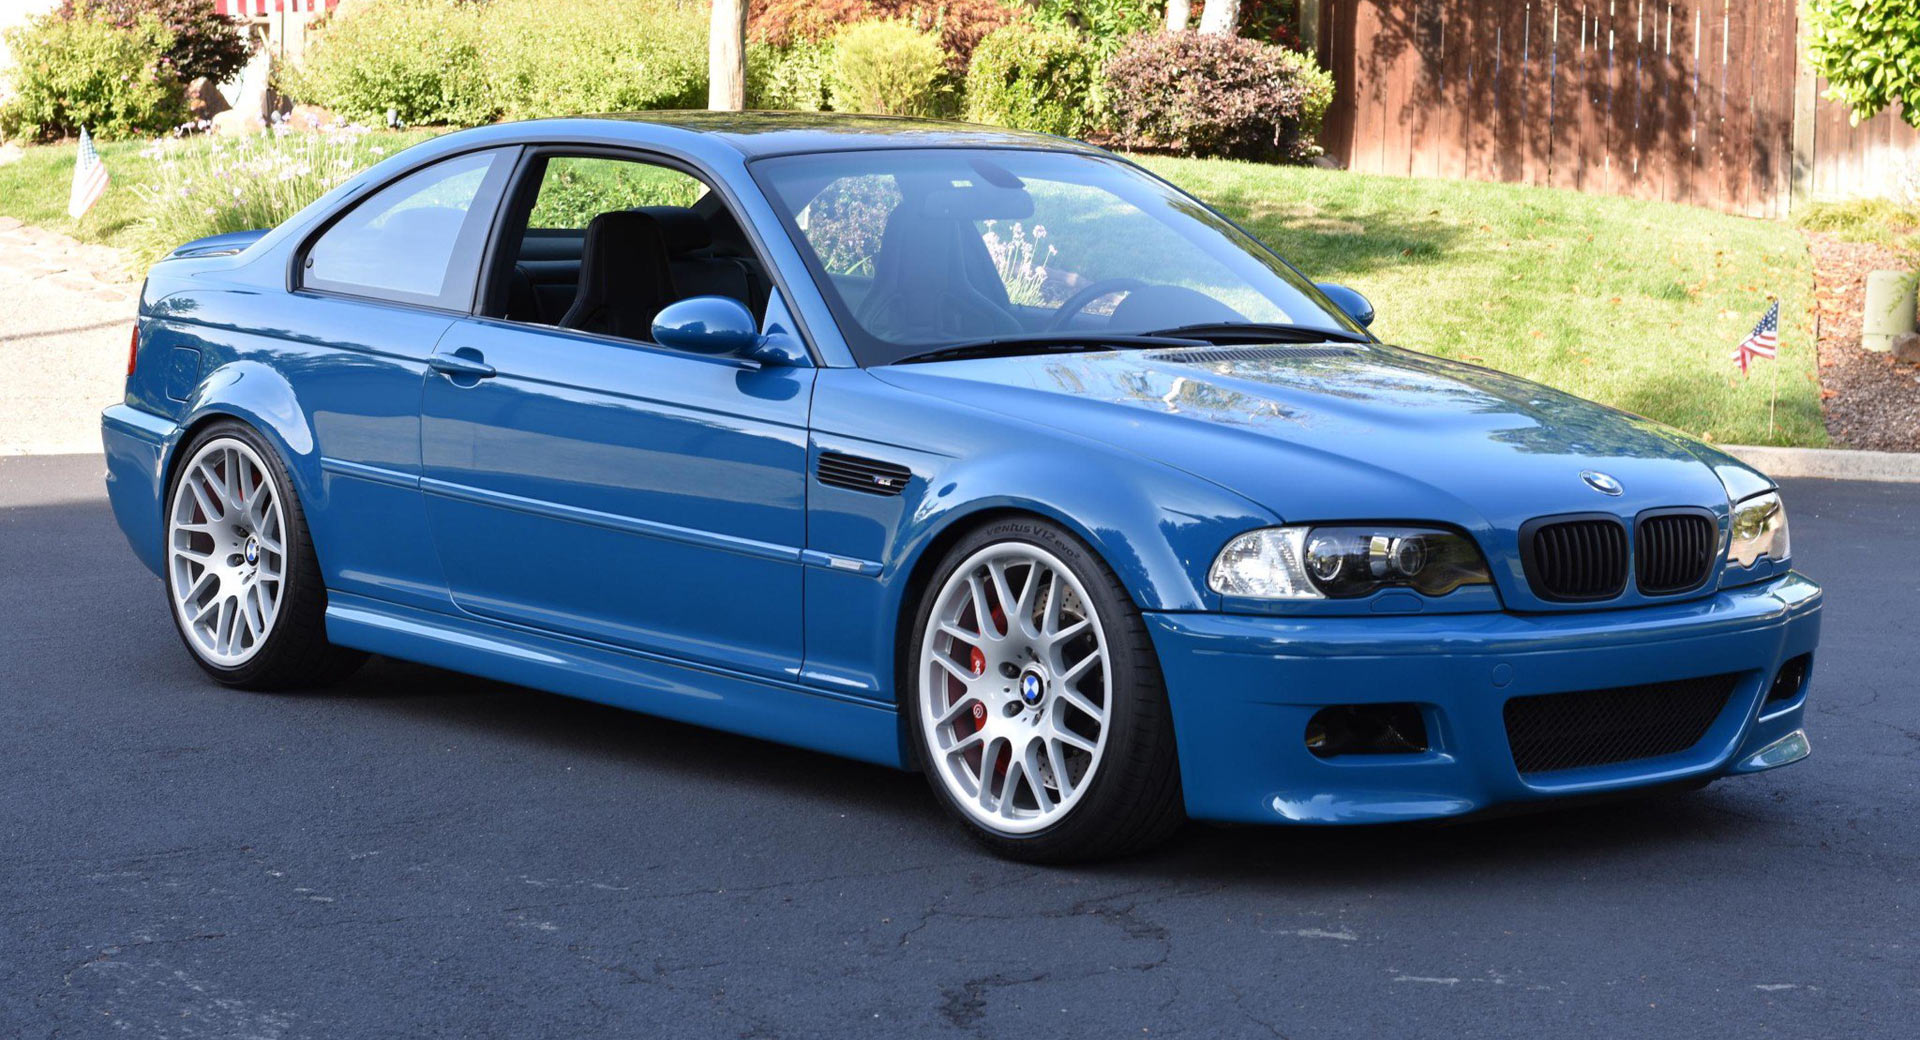 A BMW M3 E46 Just Sold For $90,000, Will This Become The New